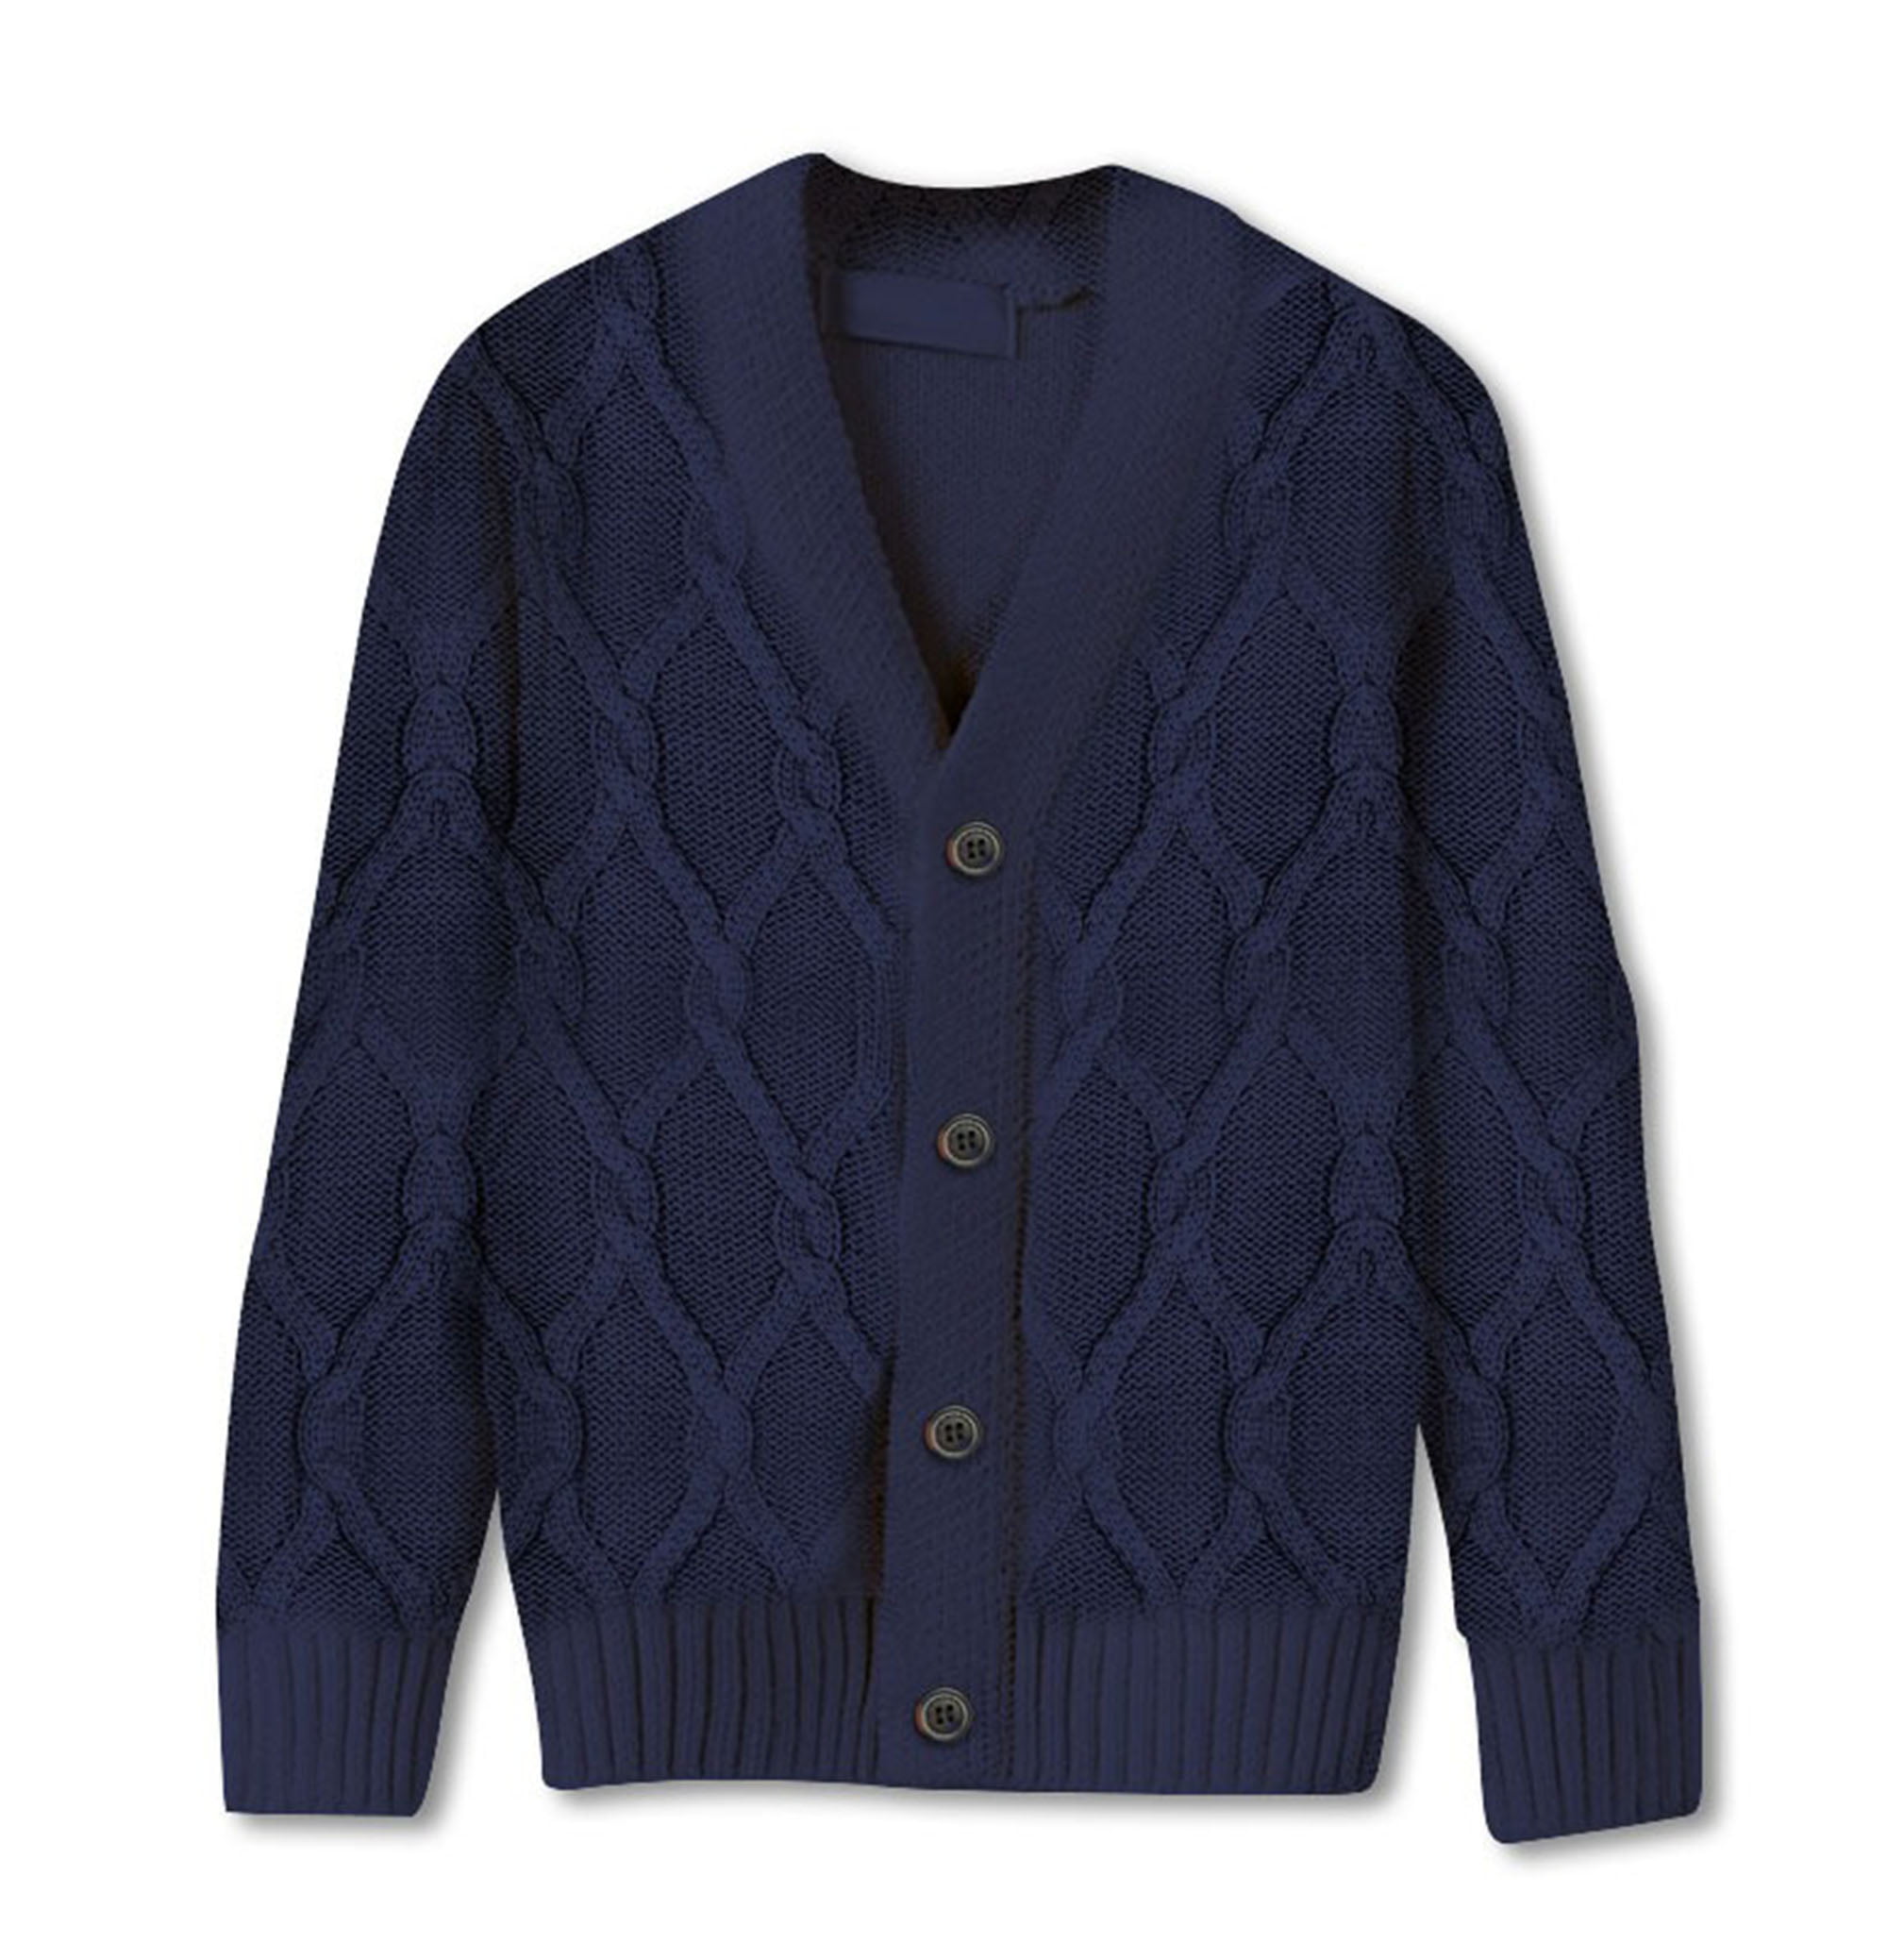 Gioberti Boys Knitted Full Zip Cardigan Sweater with Soft Brushed Flannel Lining